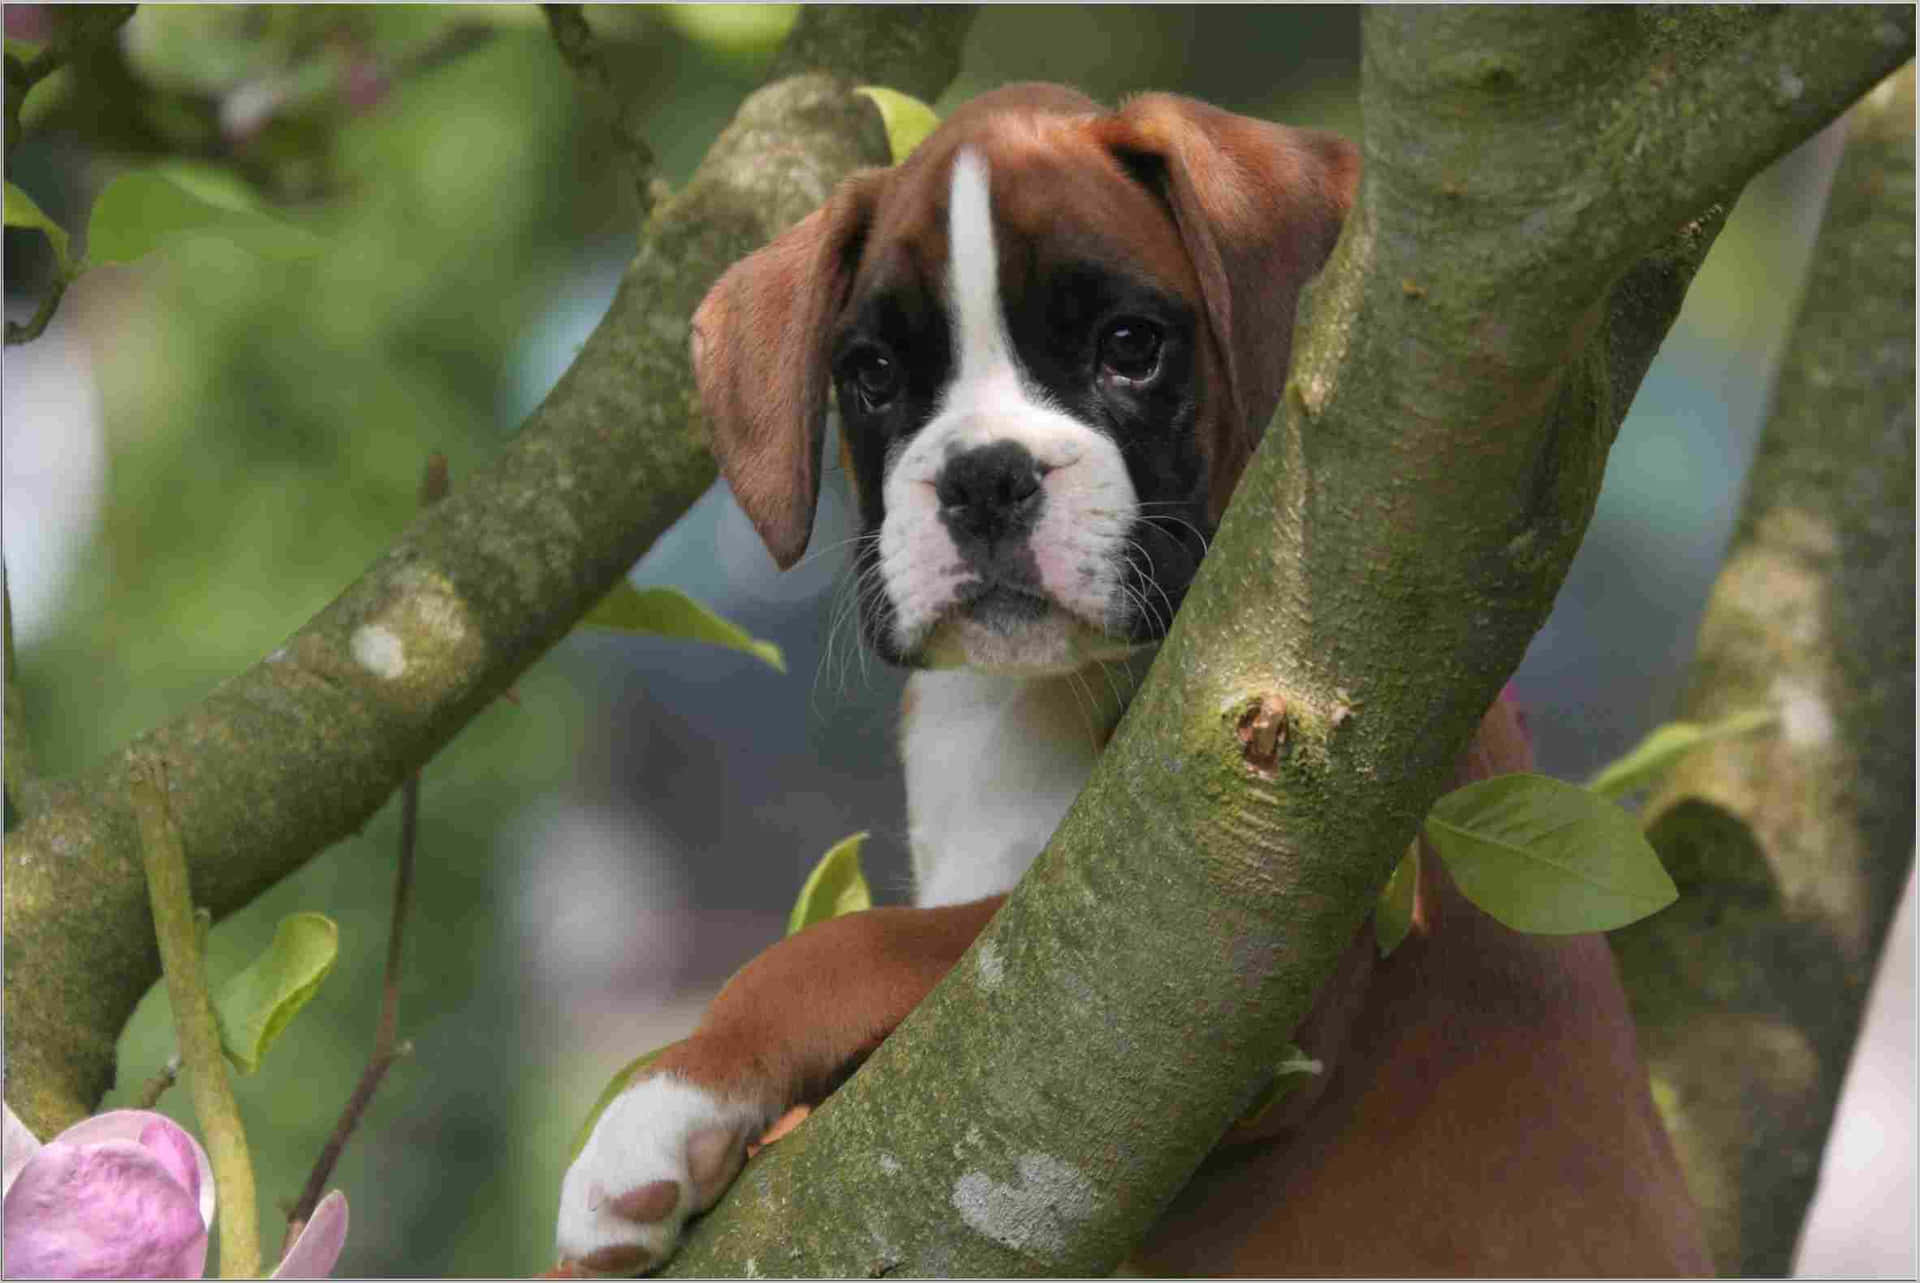 A delightful Boxer Dog lounging in the grass.